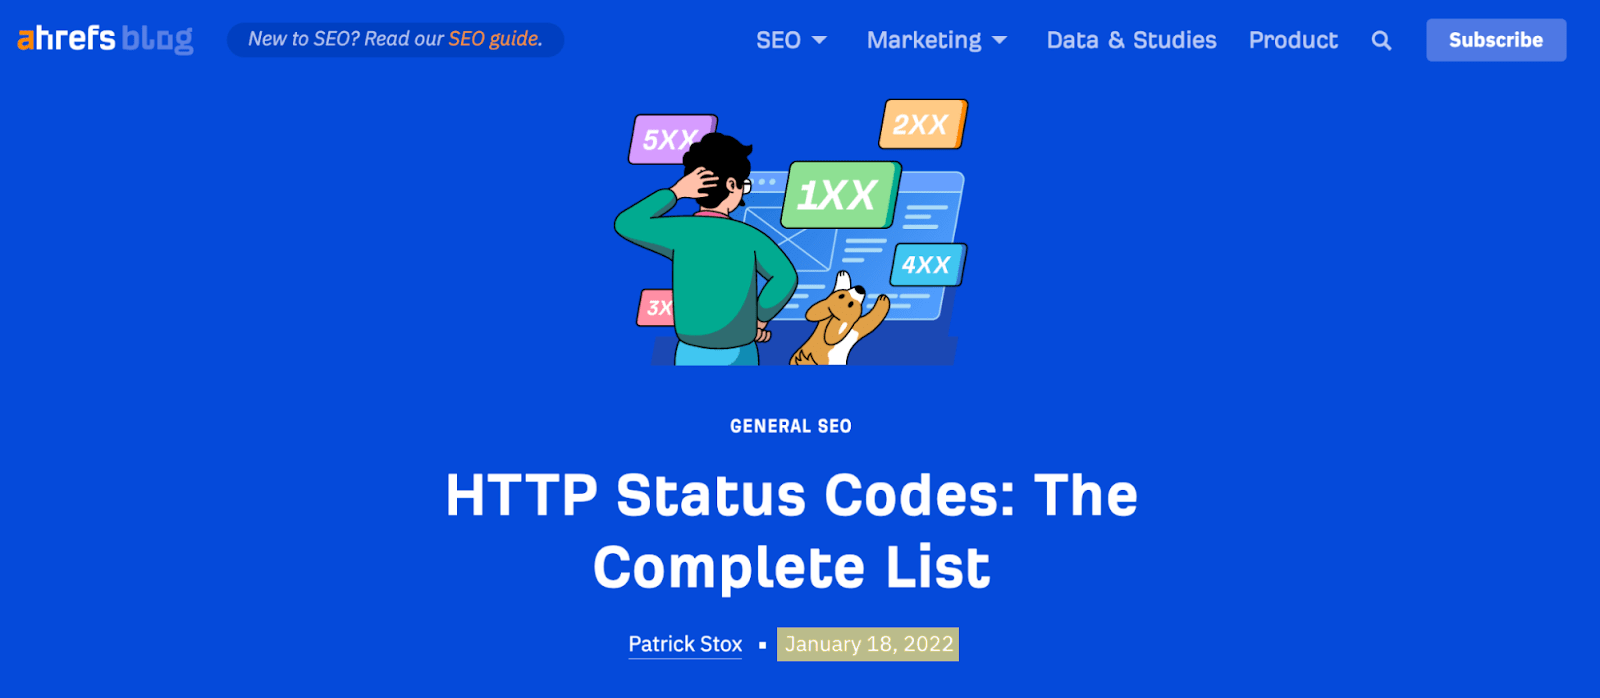 Excerpt of title and date of our blog post on HTTP status codes 